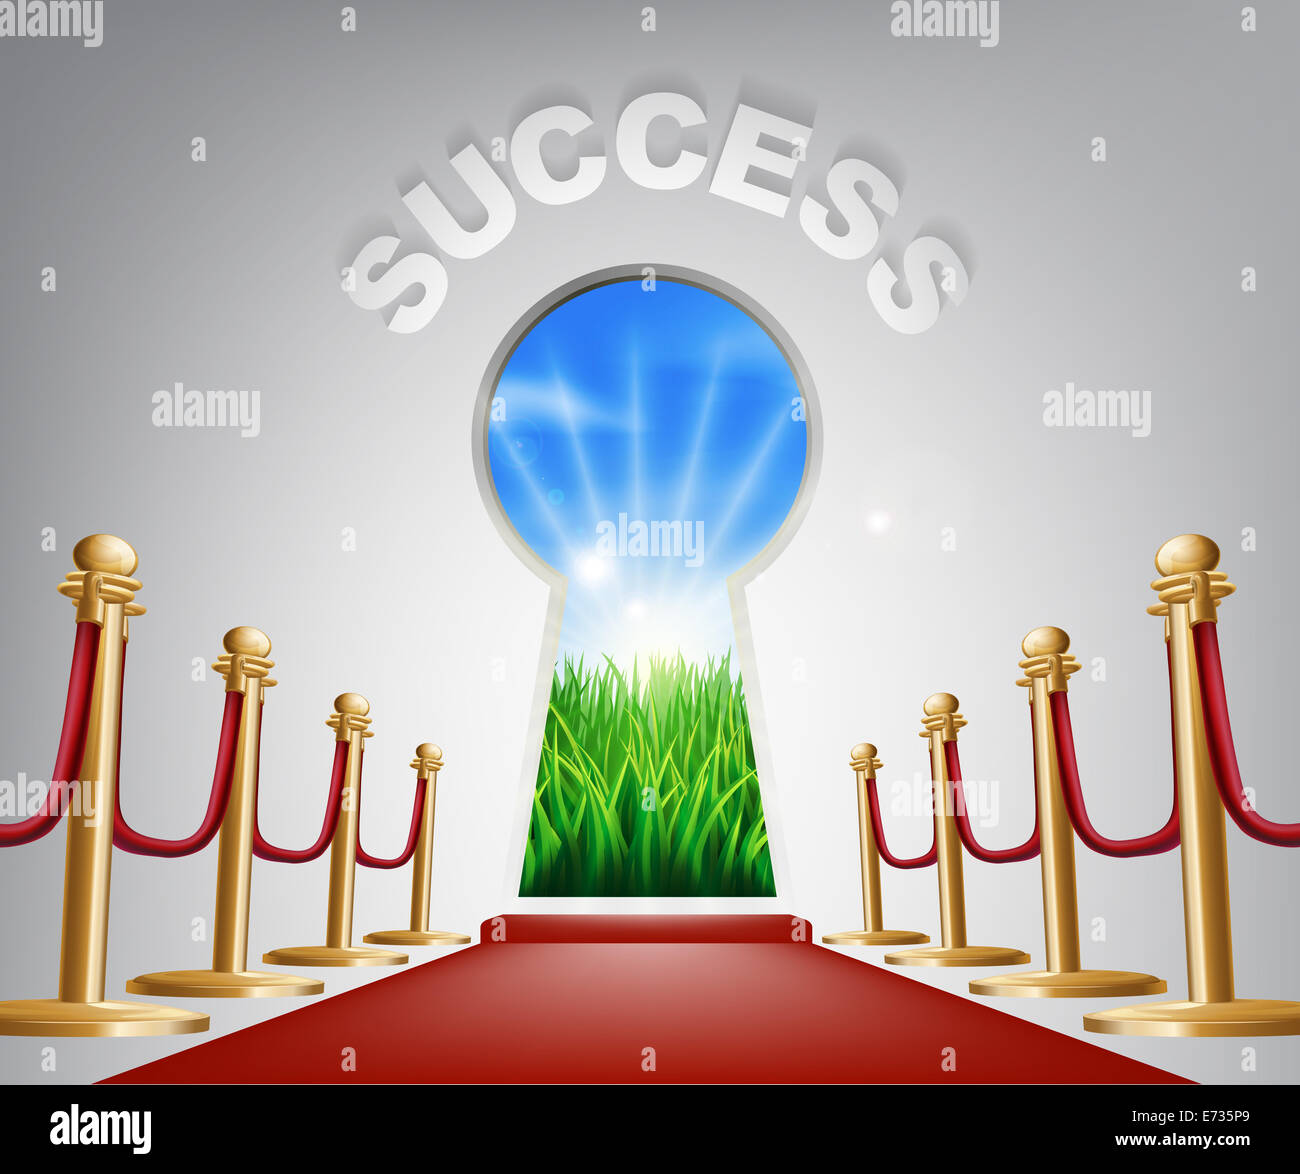 Success Door Keyhole. Concept of a keyhole with a new dawn over verdant landscape and red carpet and ropes leading up to it. Stock Photo